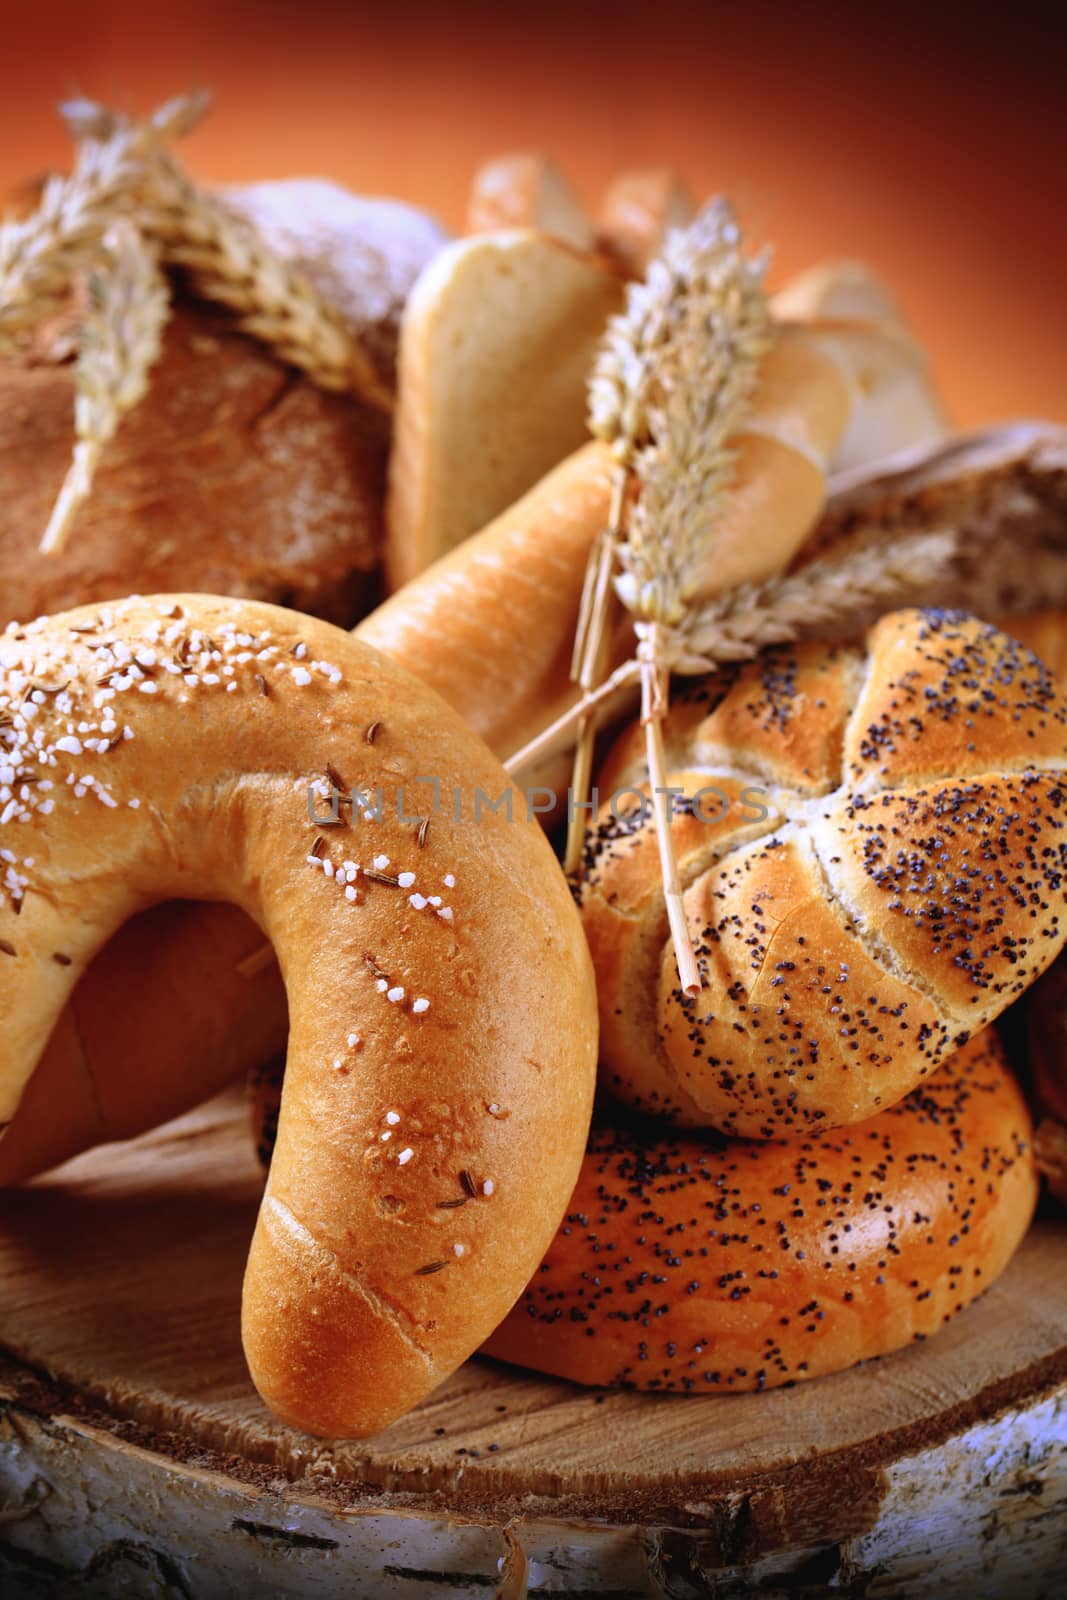 Variety of fresh bread and rolls by Digifoodstock